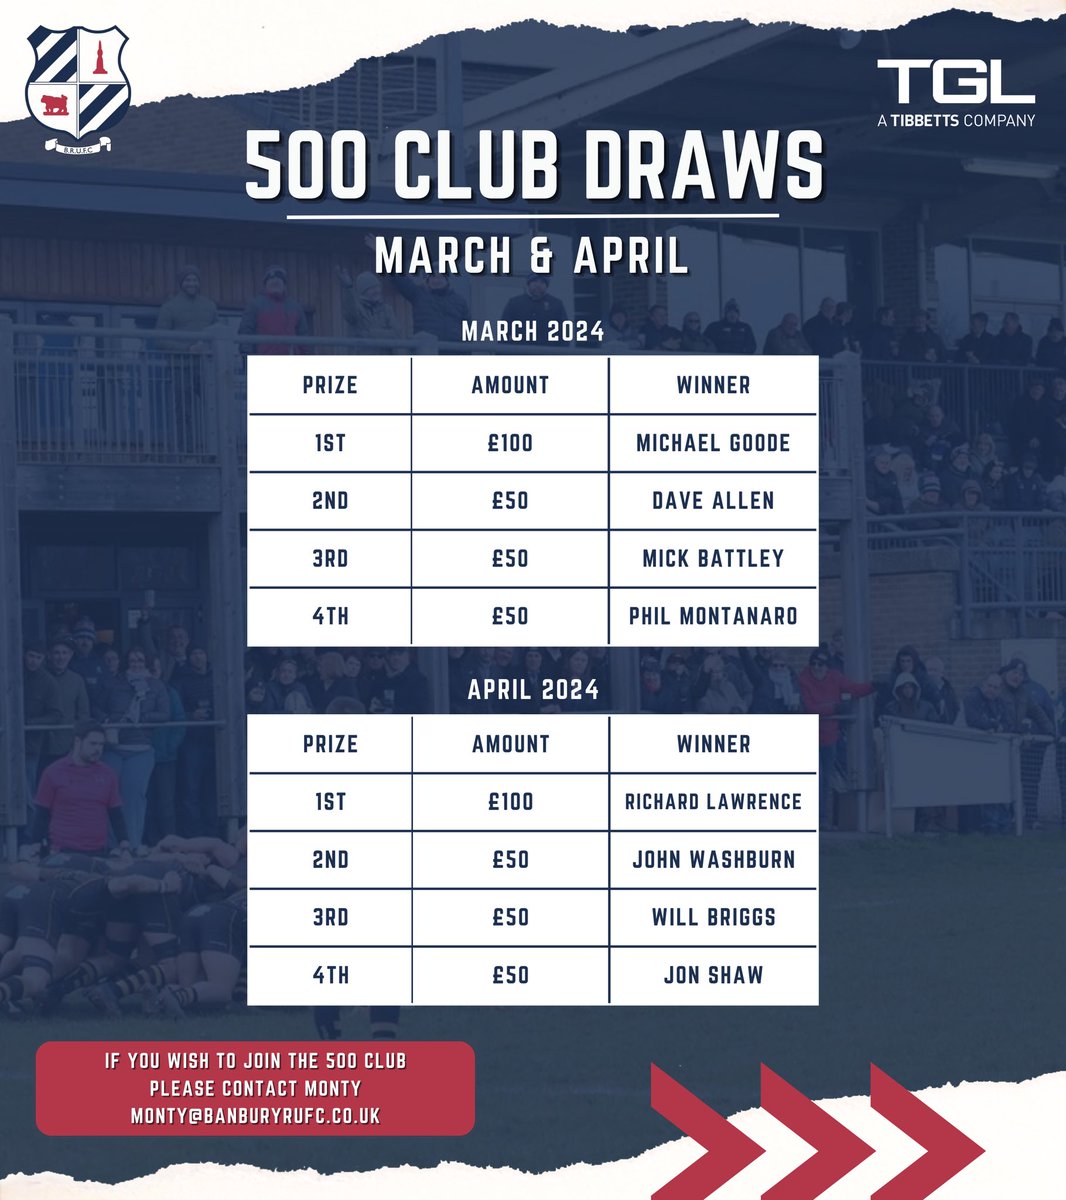 𝟱𝟬𝟬 𝗖𝗟𝗨𝗕 𝗗𝗥𝗔𝗪𝗦 🏉 5️⃣0️⃣0️⃣ Congratulations to our 500 Club winners for March and April. If you wish to join the 500 Club please contact Monty on monty@banburyrufc.co.uk banburyrufc.com/news/500-club-… #BanburyRUFC #Rugby #Bulls 🐂